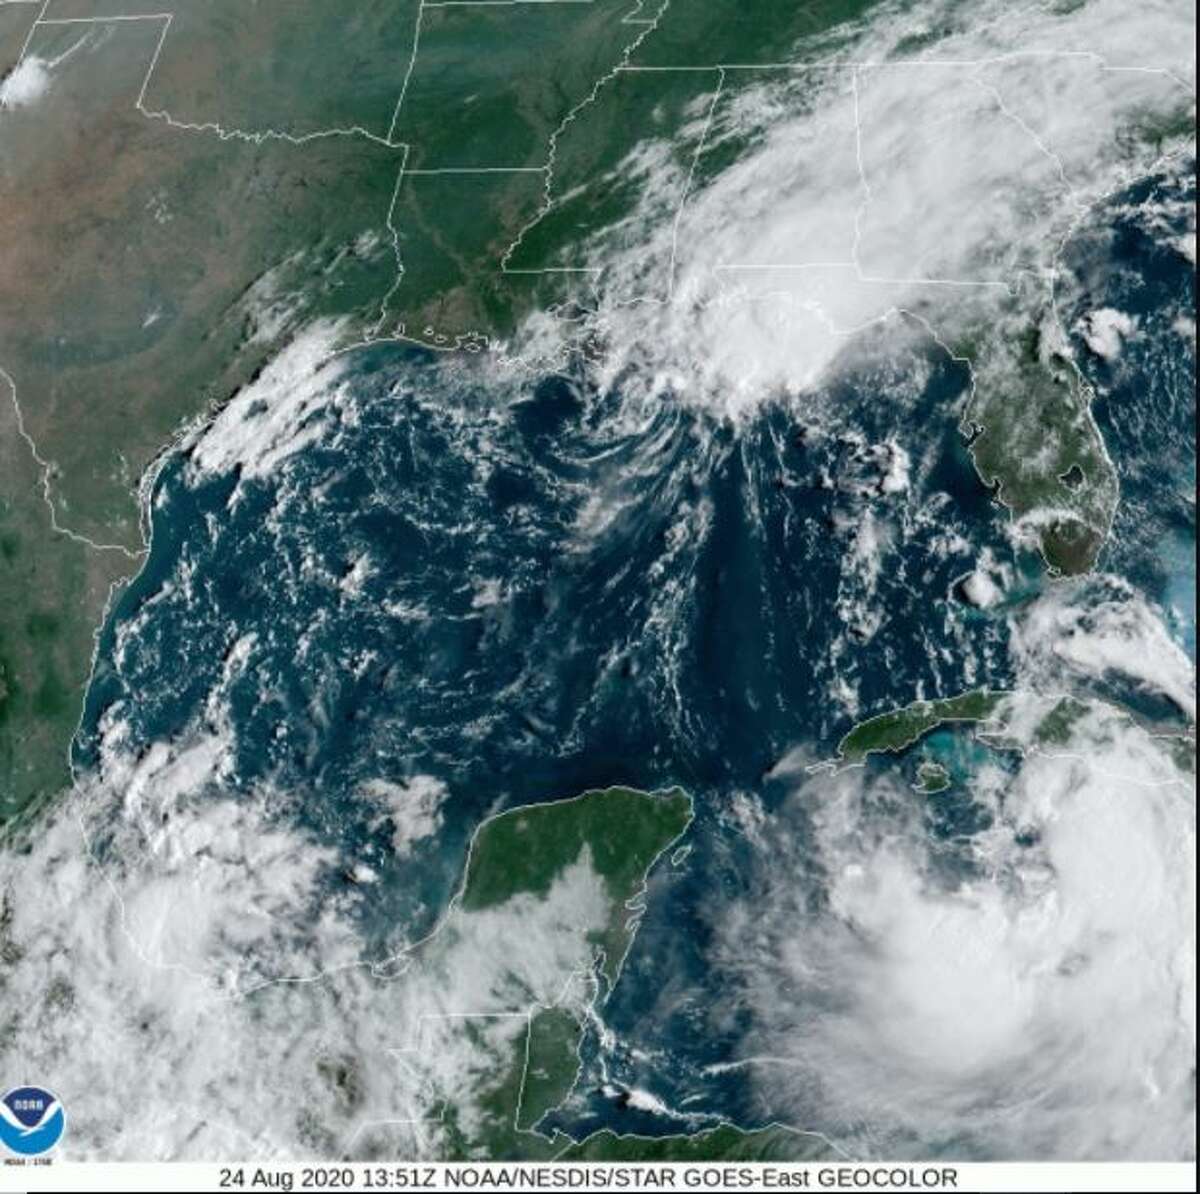 Satellite image shows the Gulf of Mexico on Monday, Aug. 24.